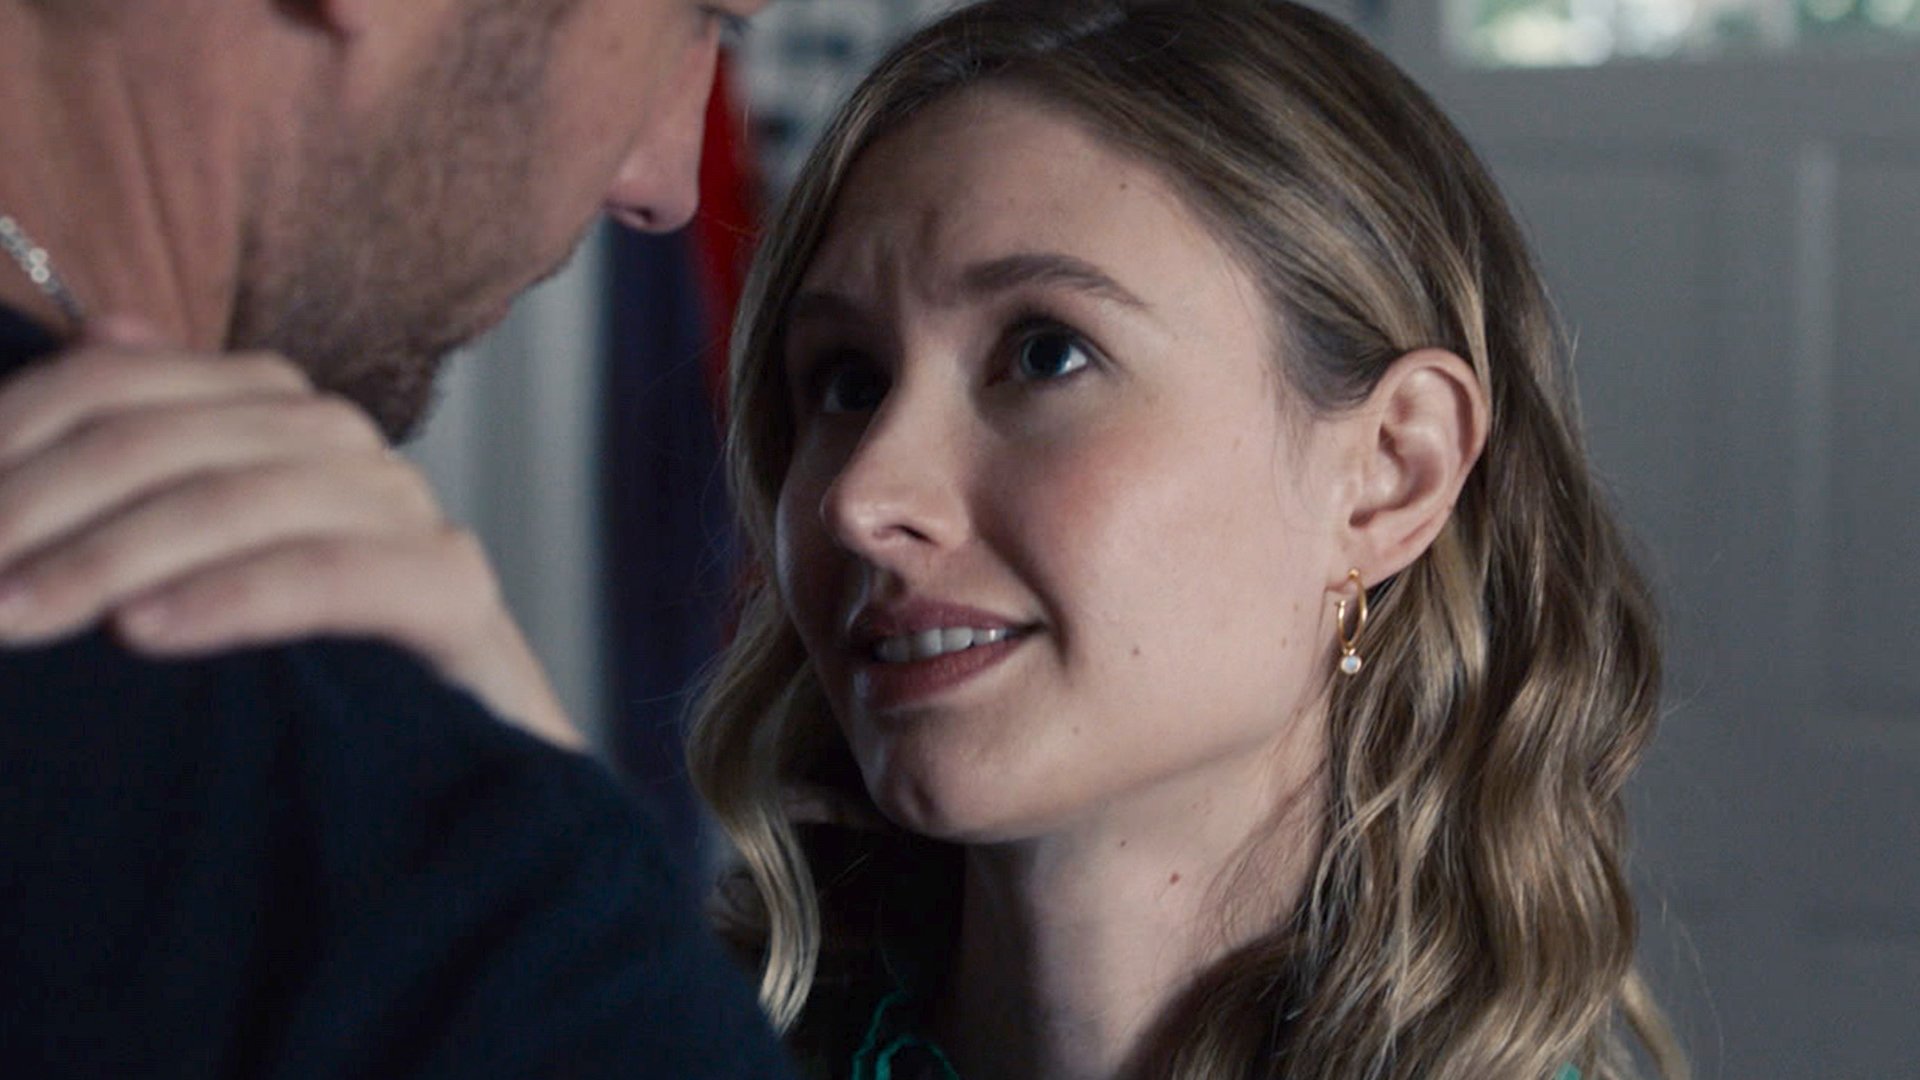 Justin Hartley as Kevin Pearson looks at Caitlin Thompson as Madison Simons in ‘This Is Us’ Season 5